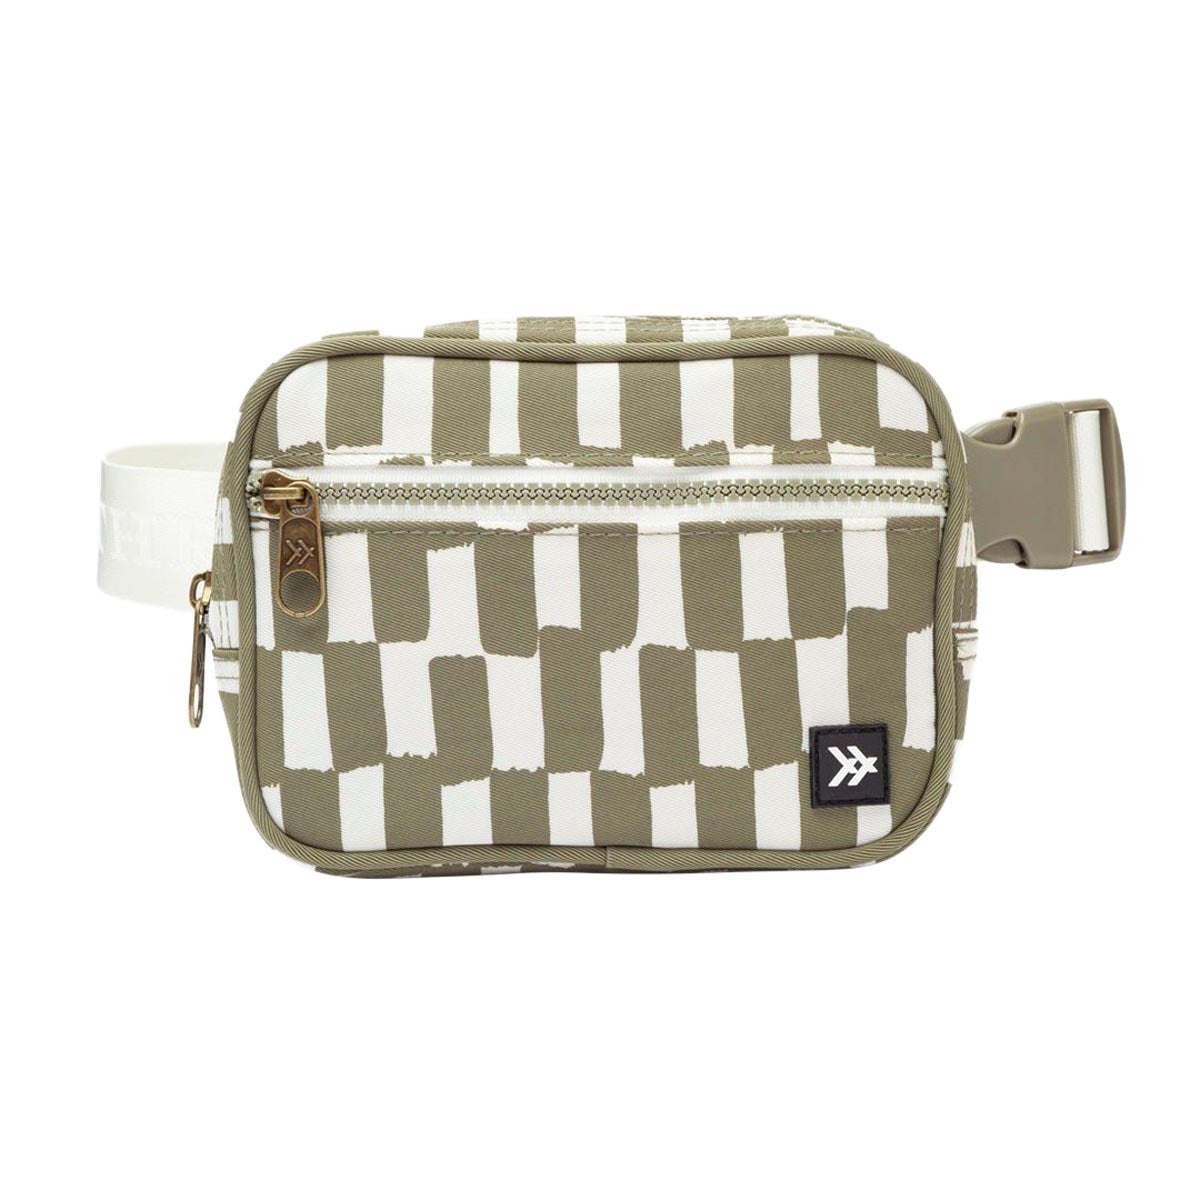 Thread Fanny Pack Bag - Scout image 1